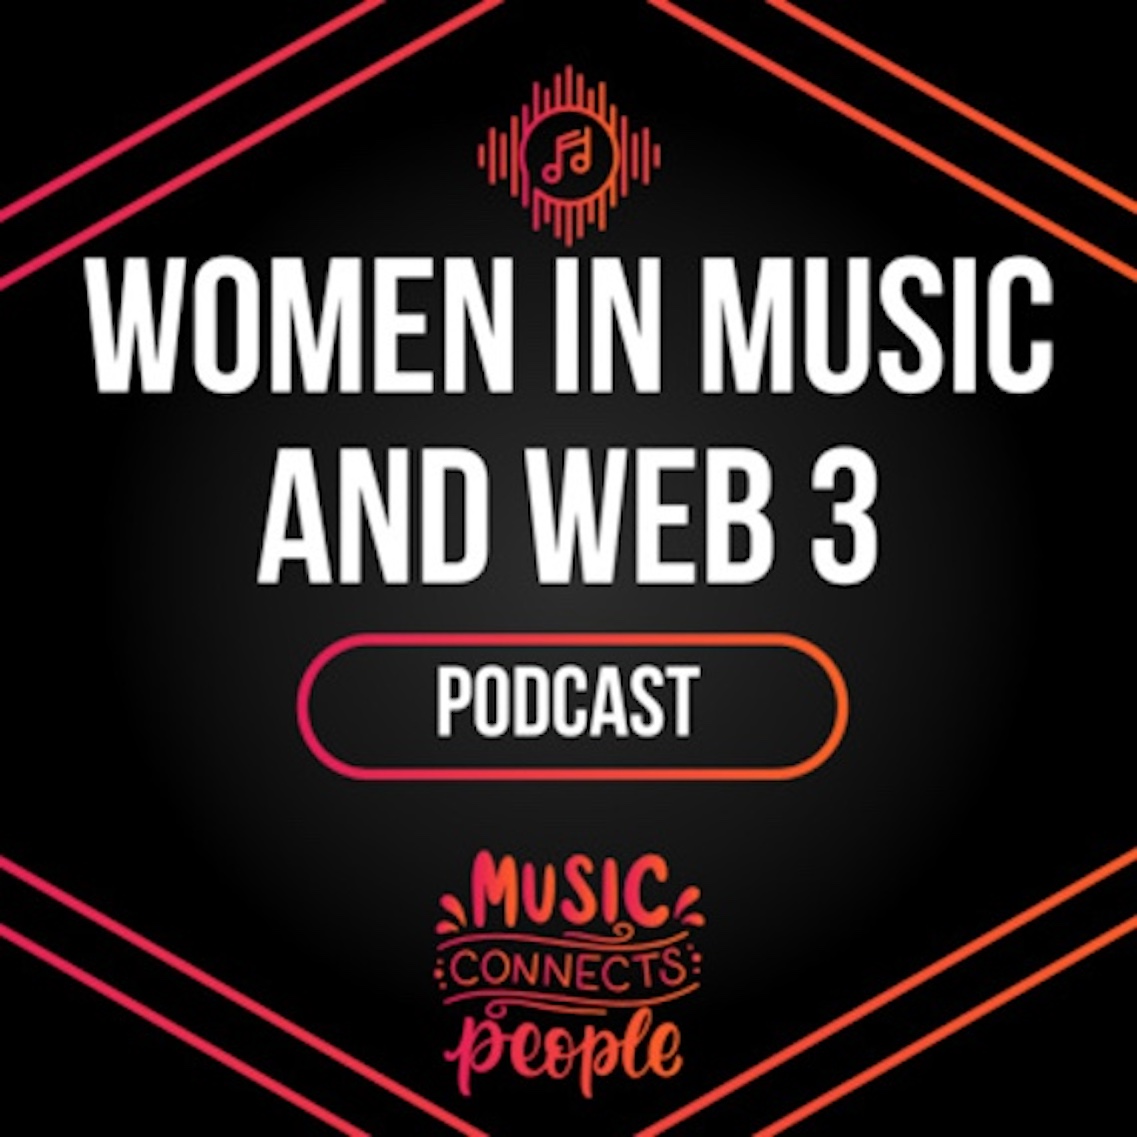 Screenshot of Women in Music Podcast by undefined